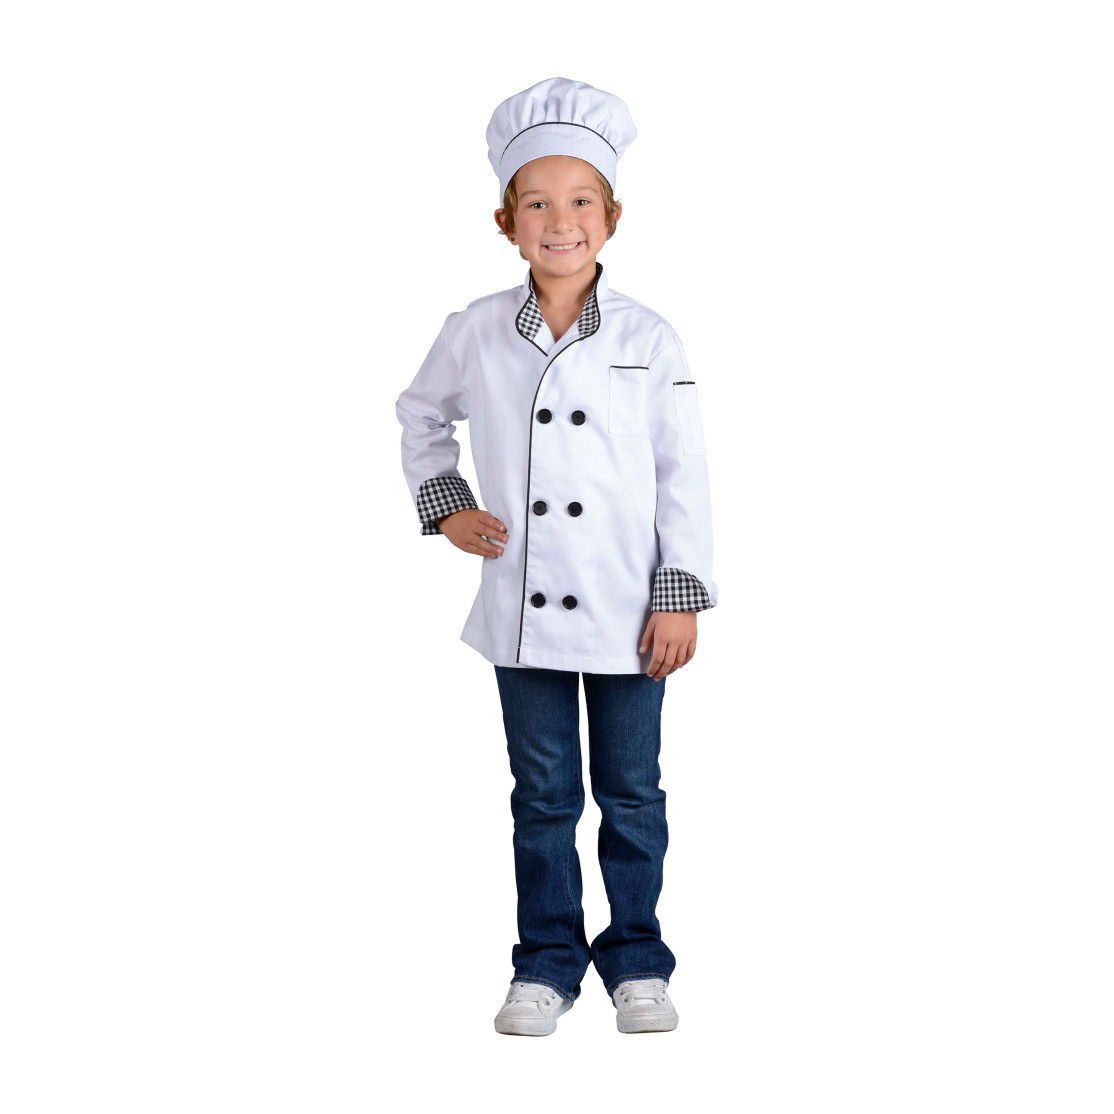 Aeromax jr chef child costume jacket and hat small or large